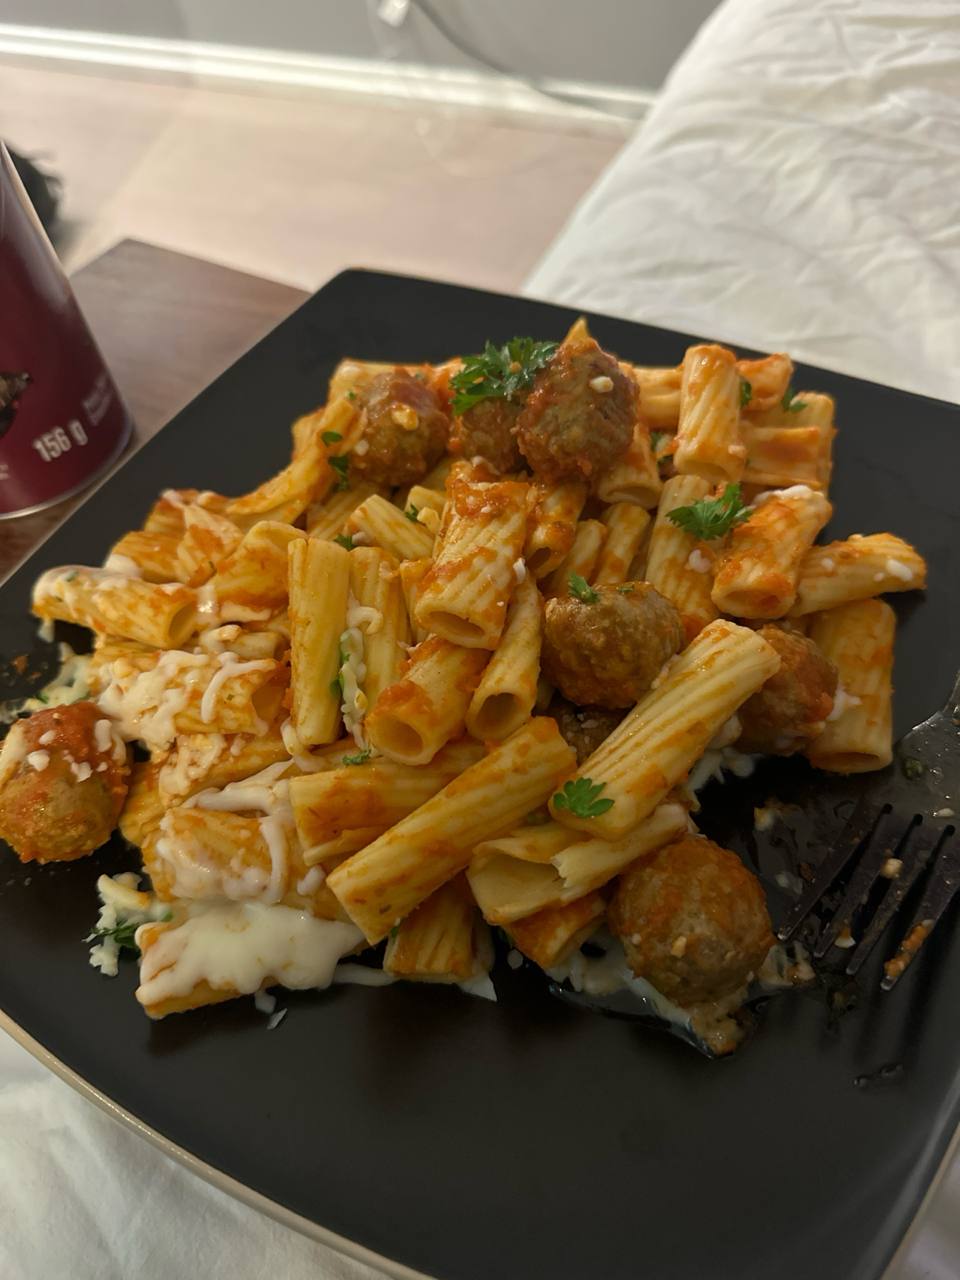 Pasta With Meatballs